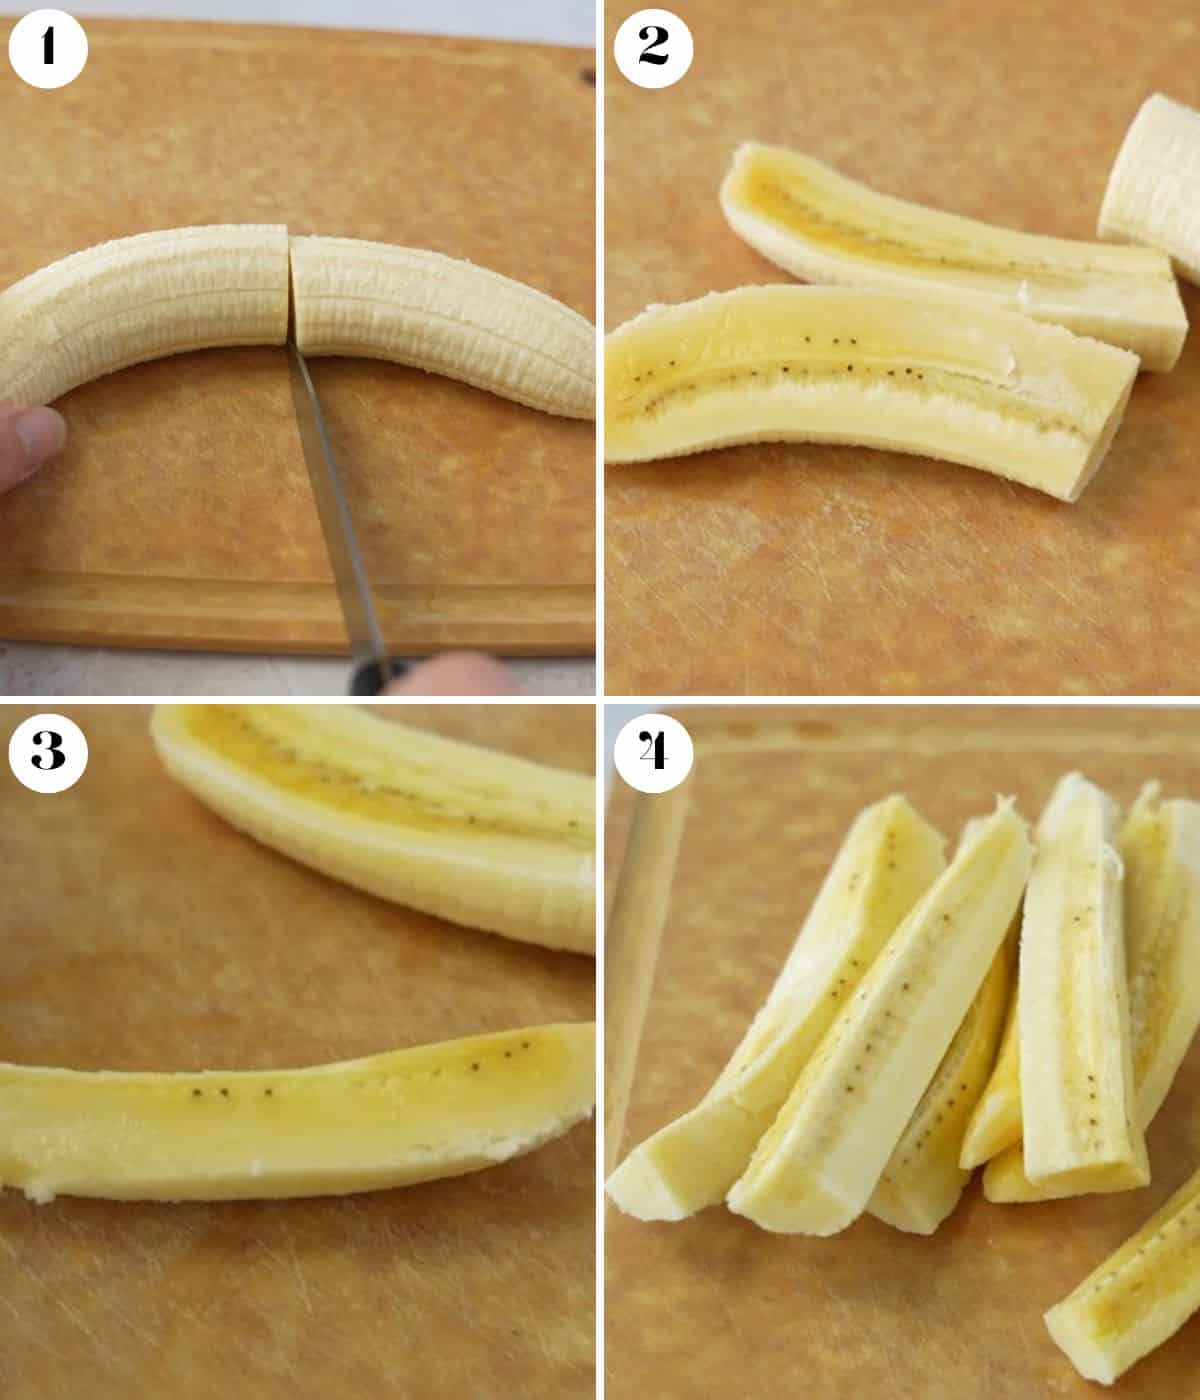 Four image collage showing how to slice banana.